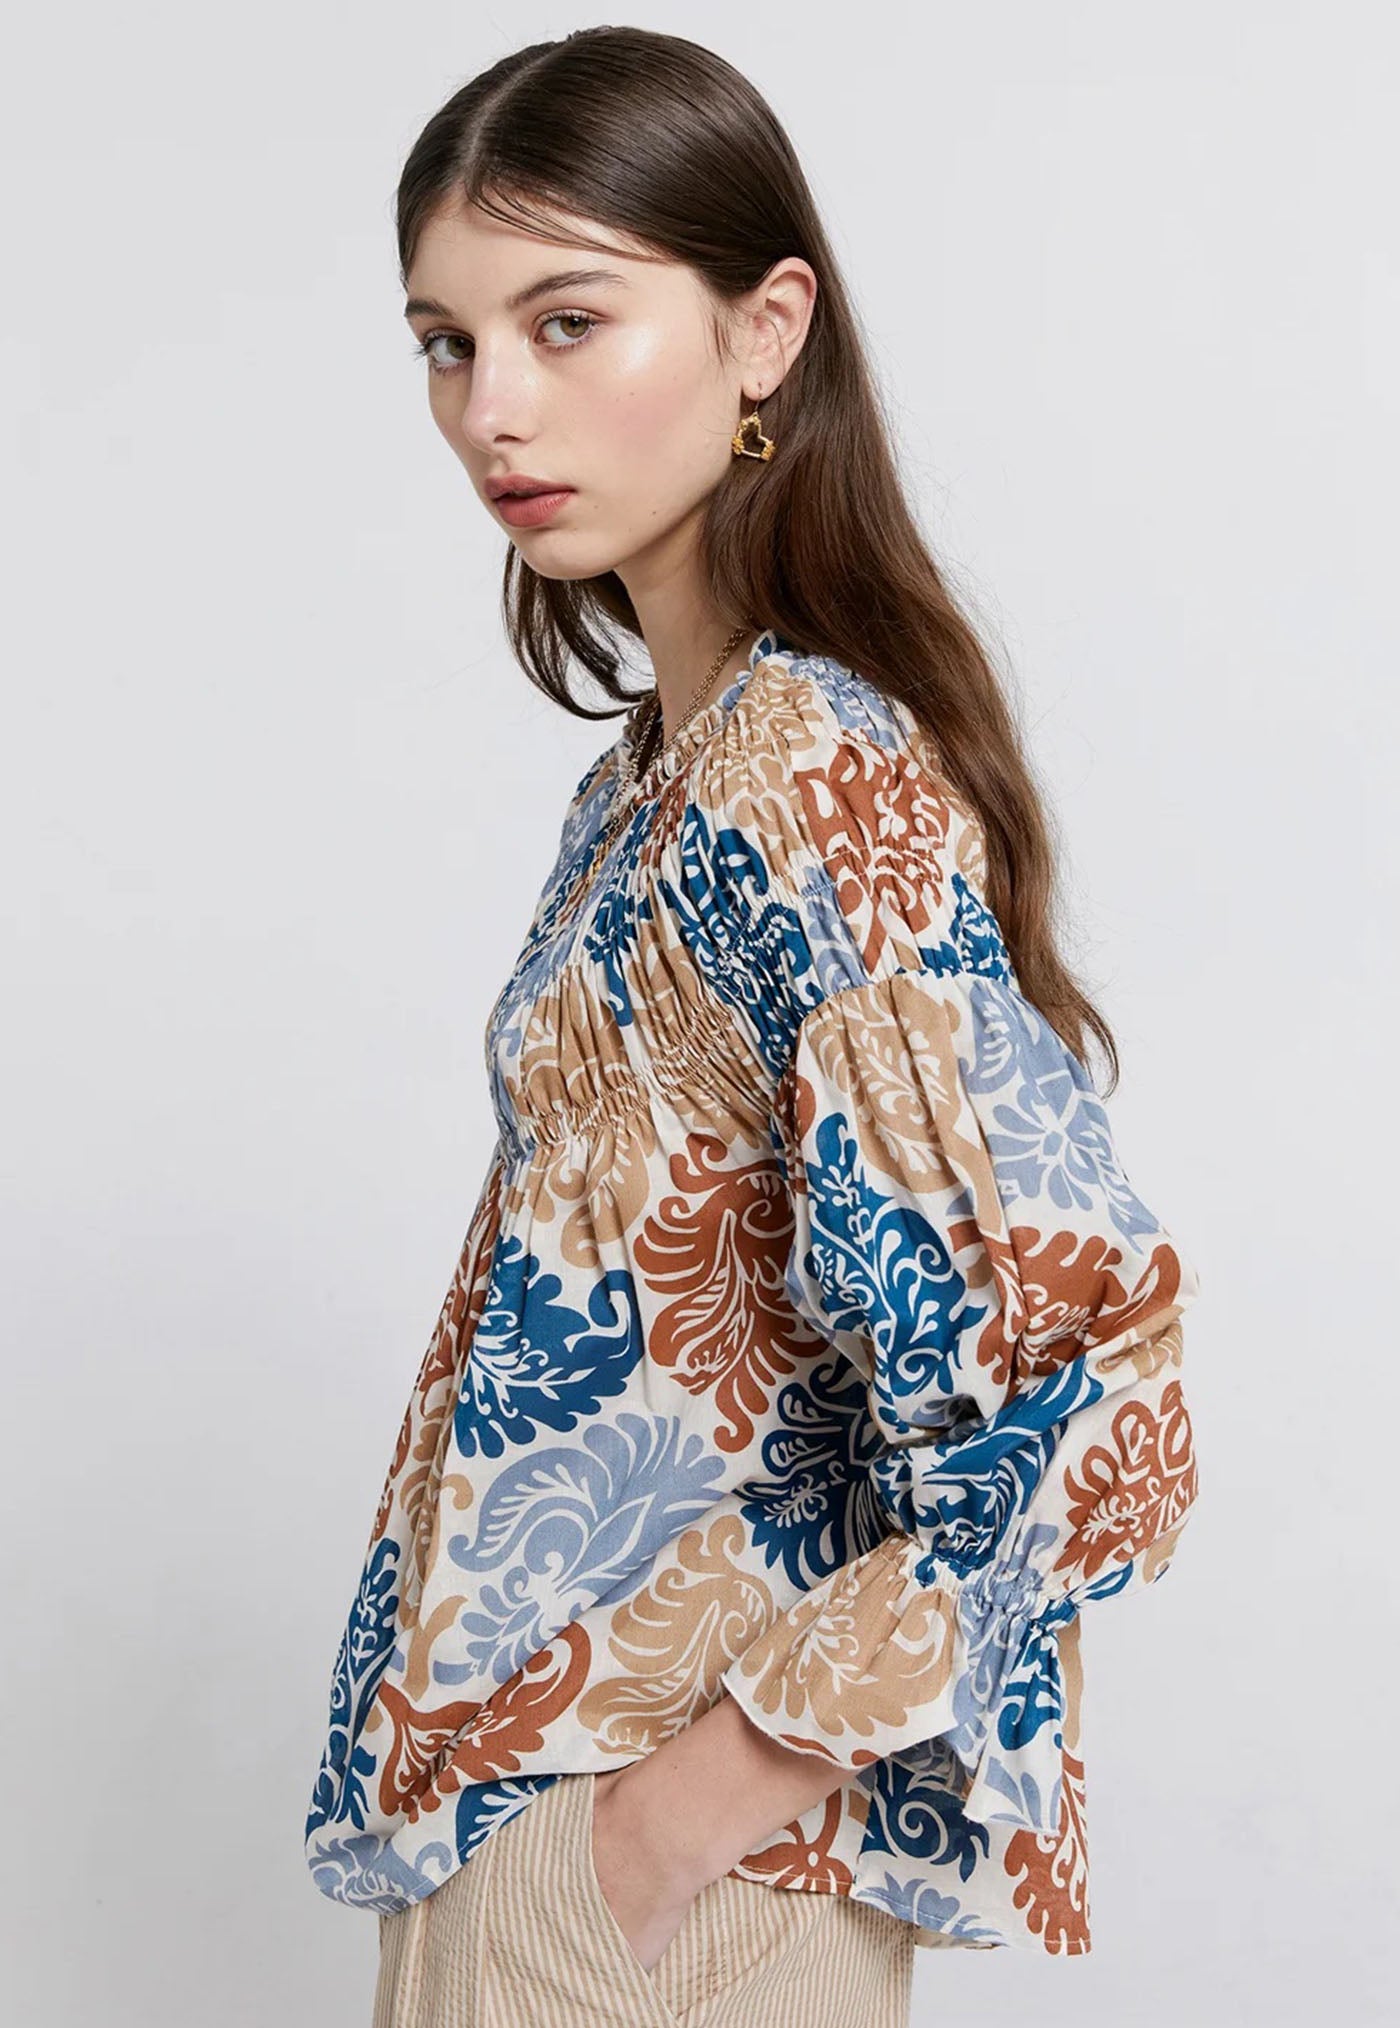 Prairie Shirred Blouse - Floral Sand Multi sold by Angel Divine